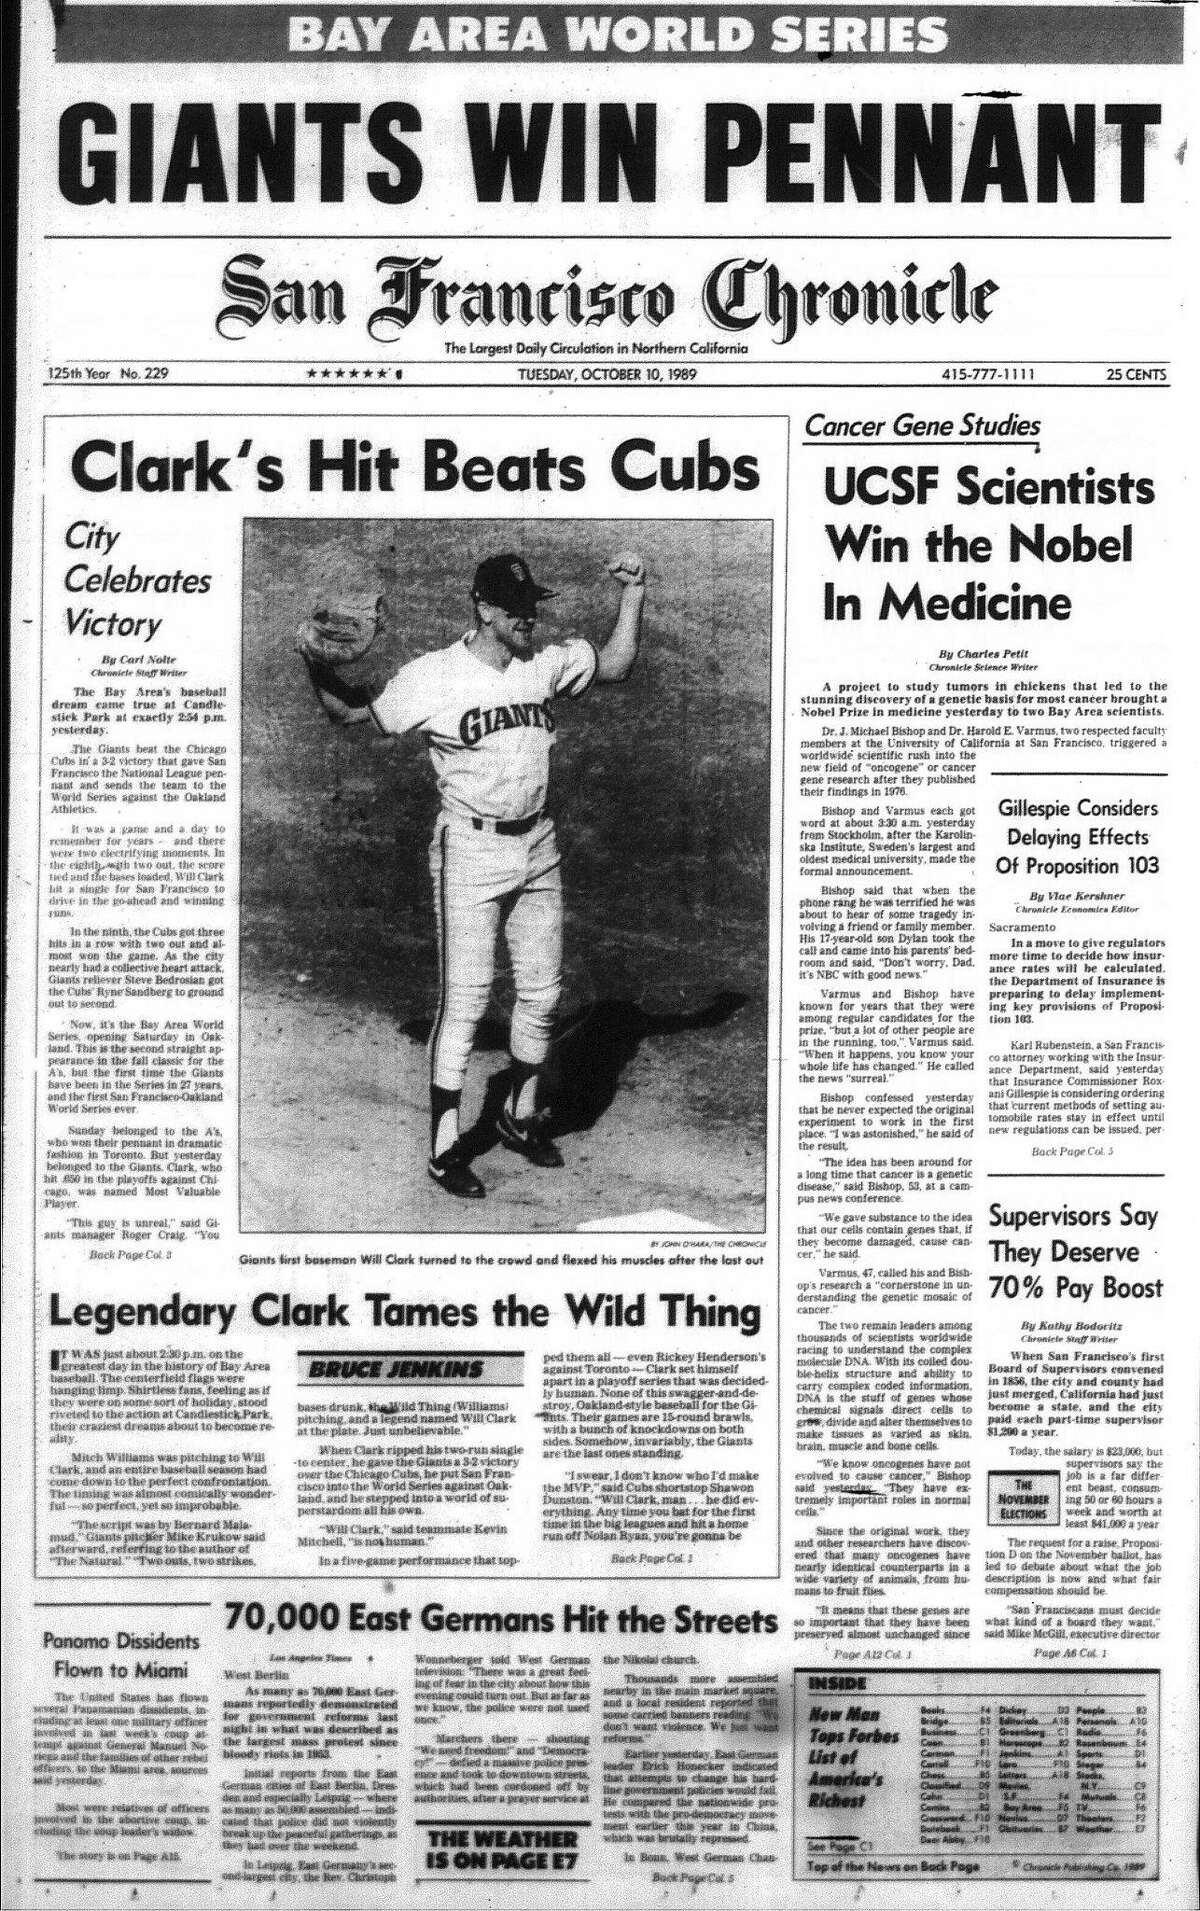 Chronicle Covers: The Thrill of the Giants' 1989 NLCS win